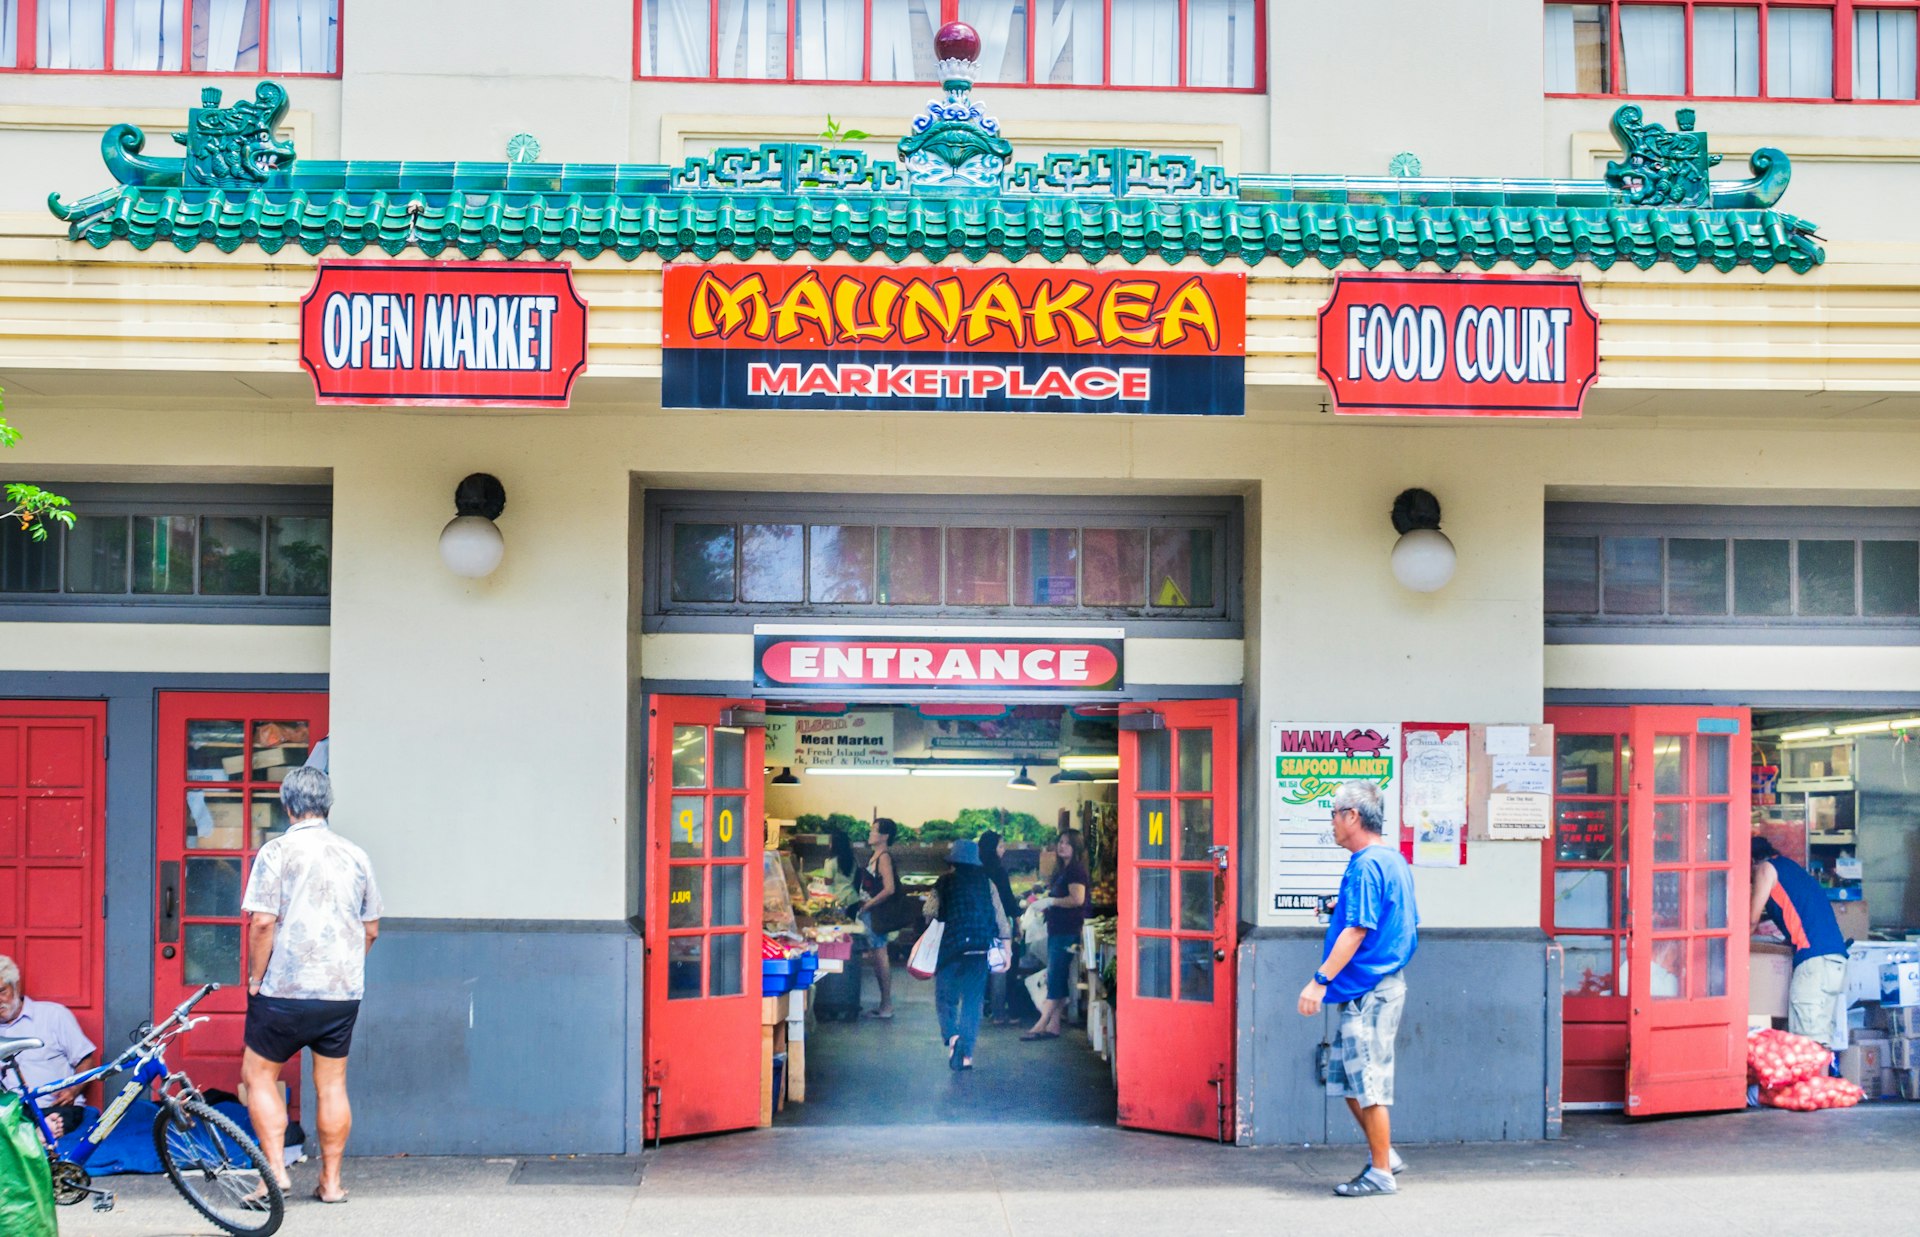 The exterior of a white building with red signs that say "Open Market", "Maunakea Marketplace" and "Food Court"